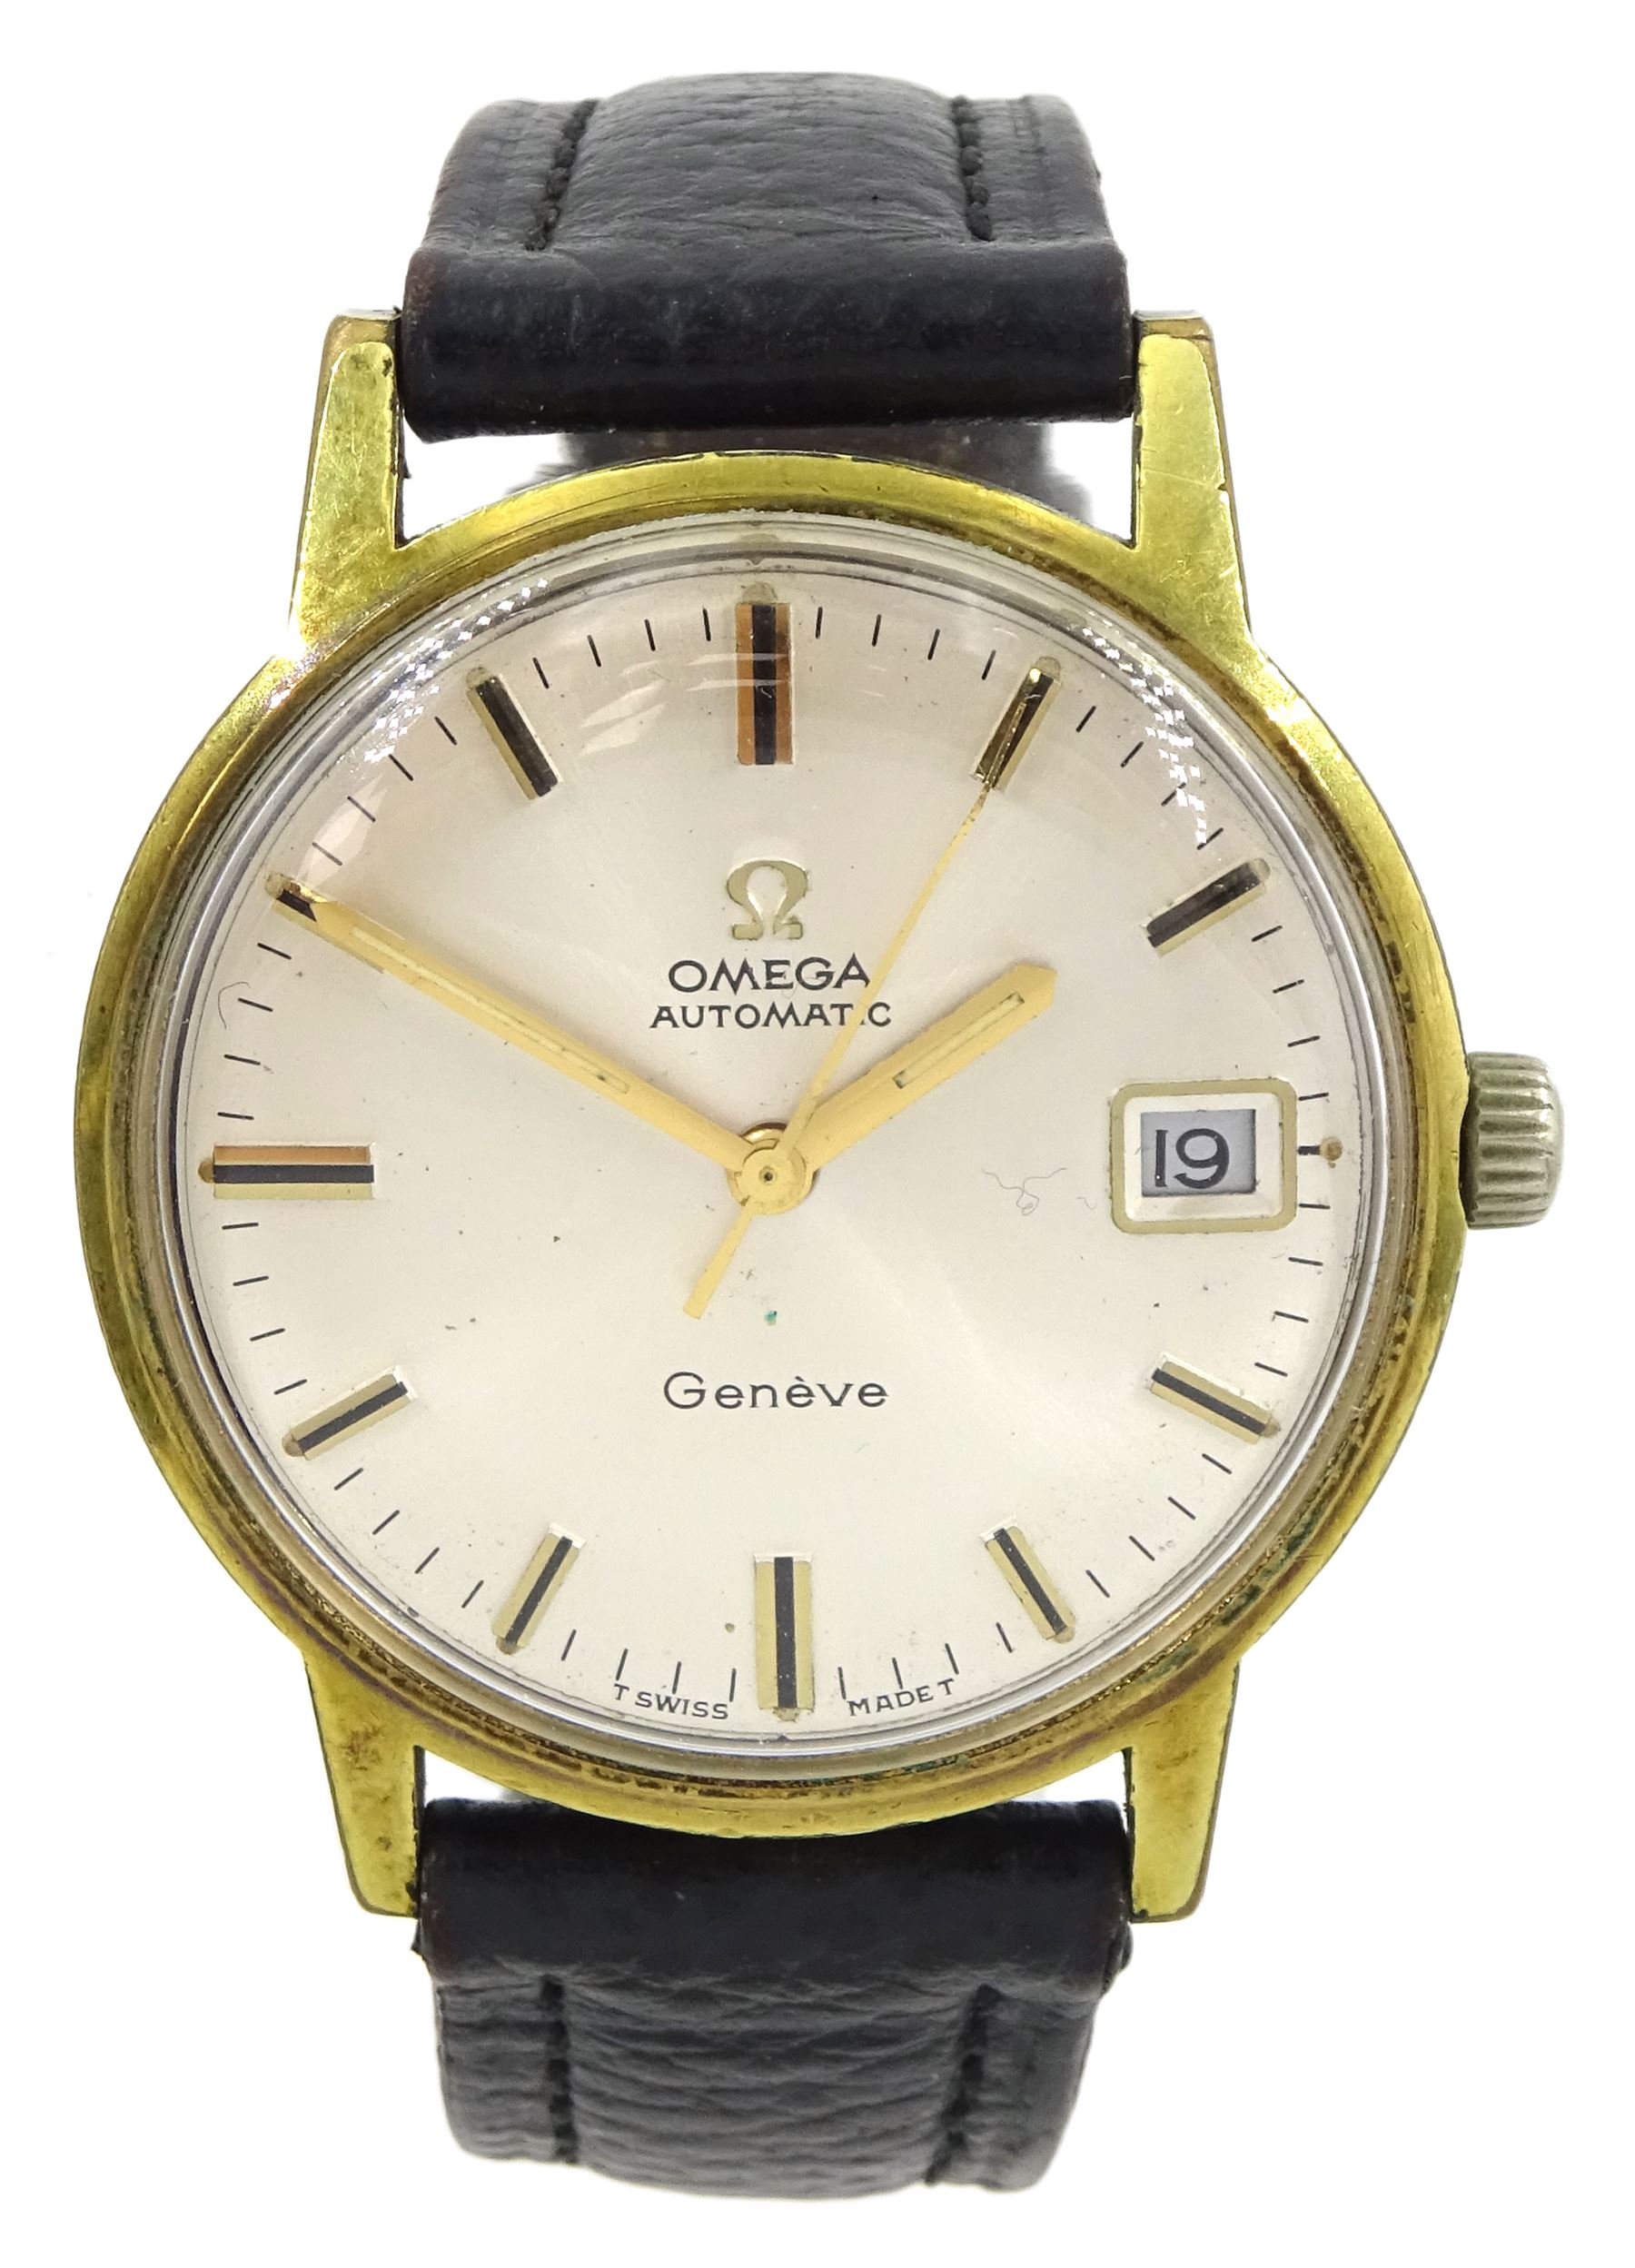 Omega Geneve gentleman's gold-plated automatic wristwatch